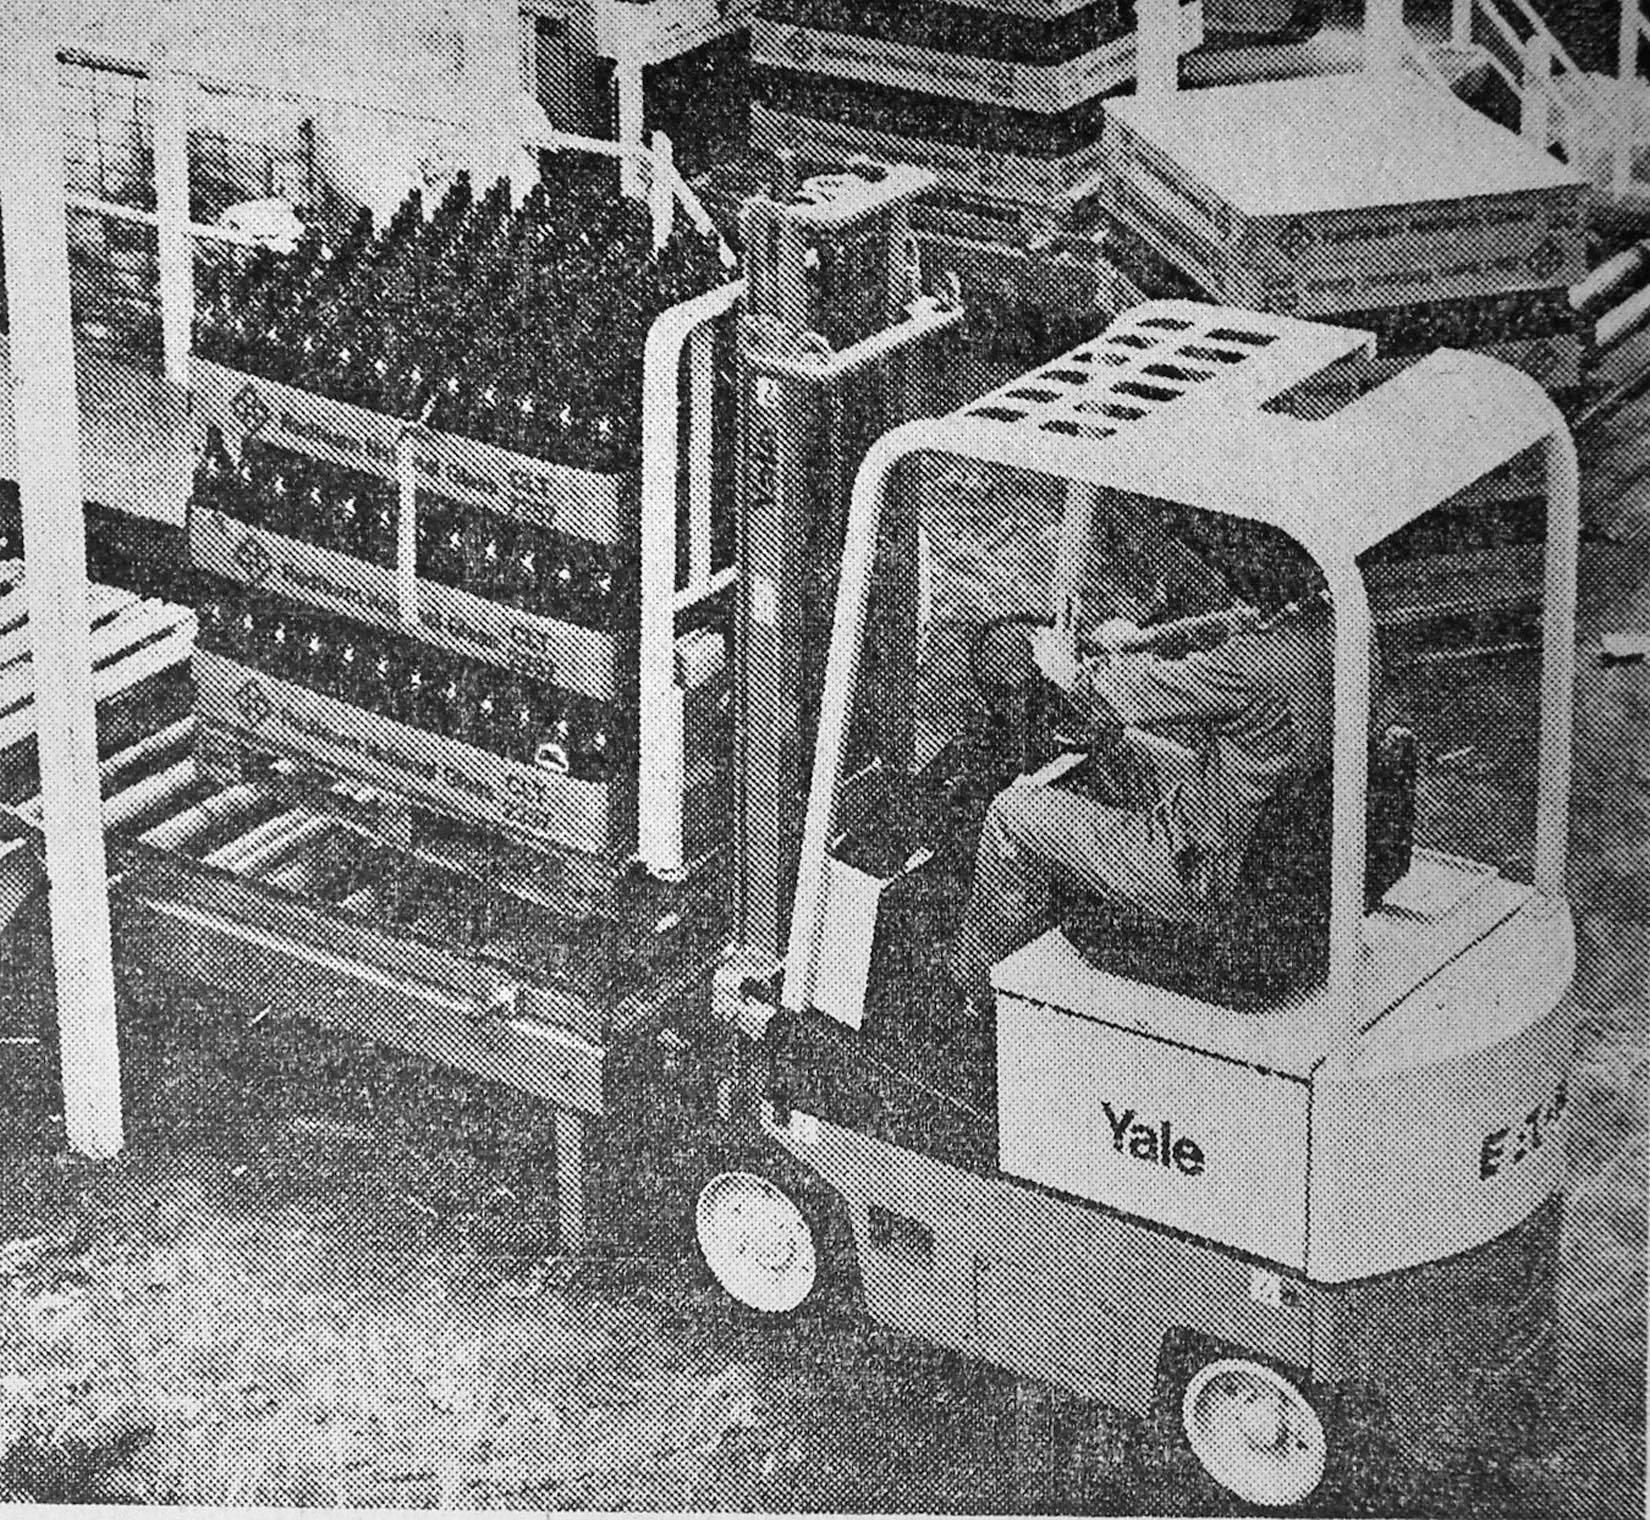 FORK ME: A new range of trucks was launched in 1979